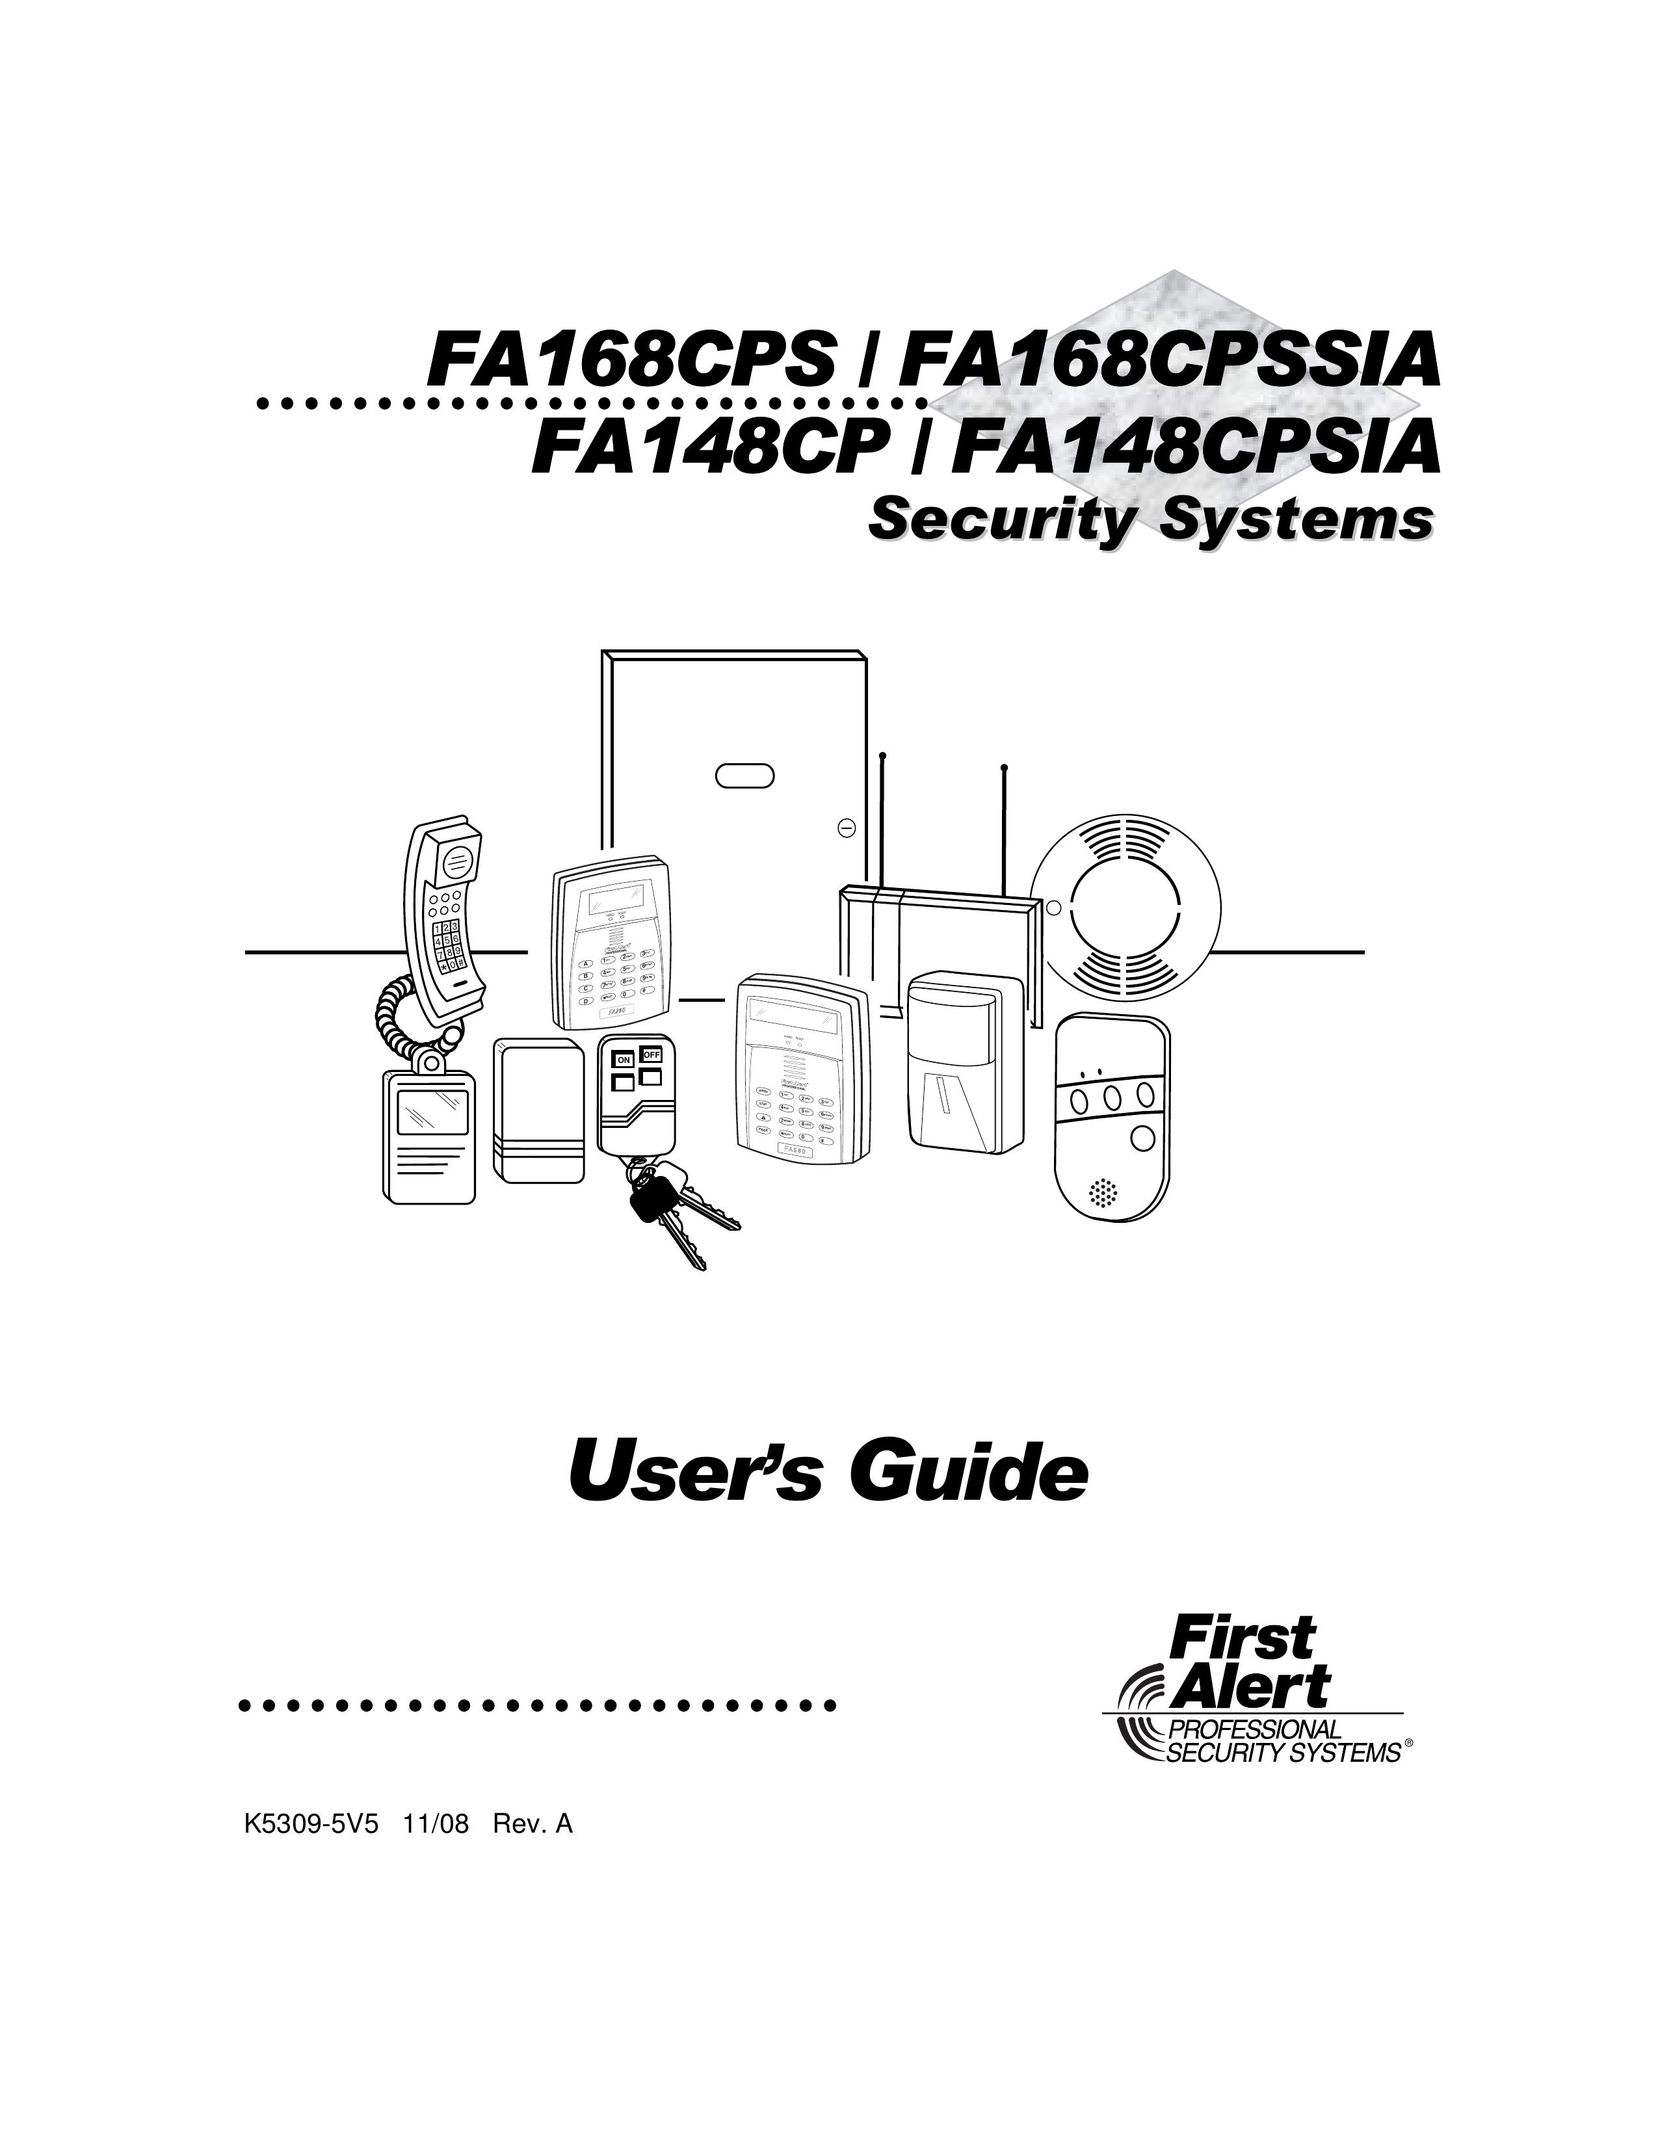 Garmin FA168CPS Home Security System User Manual